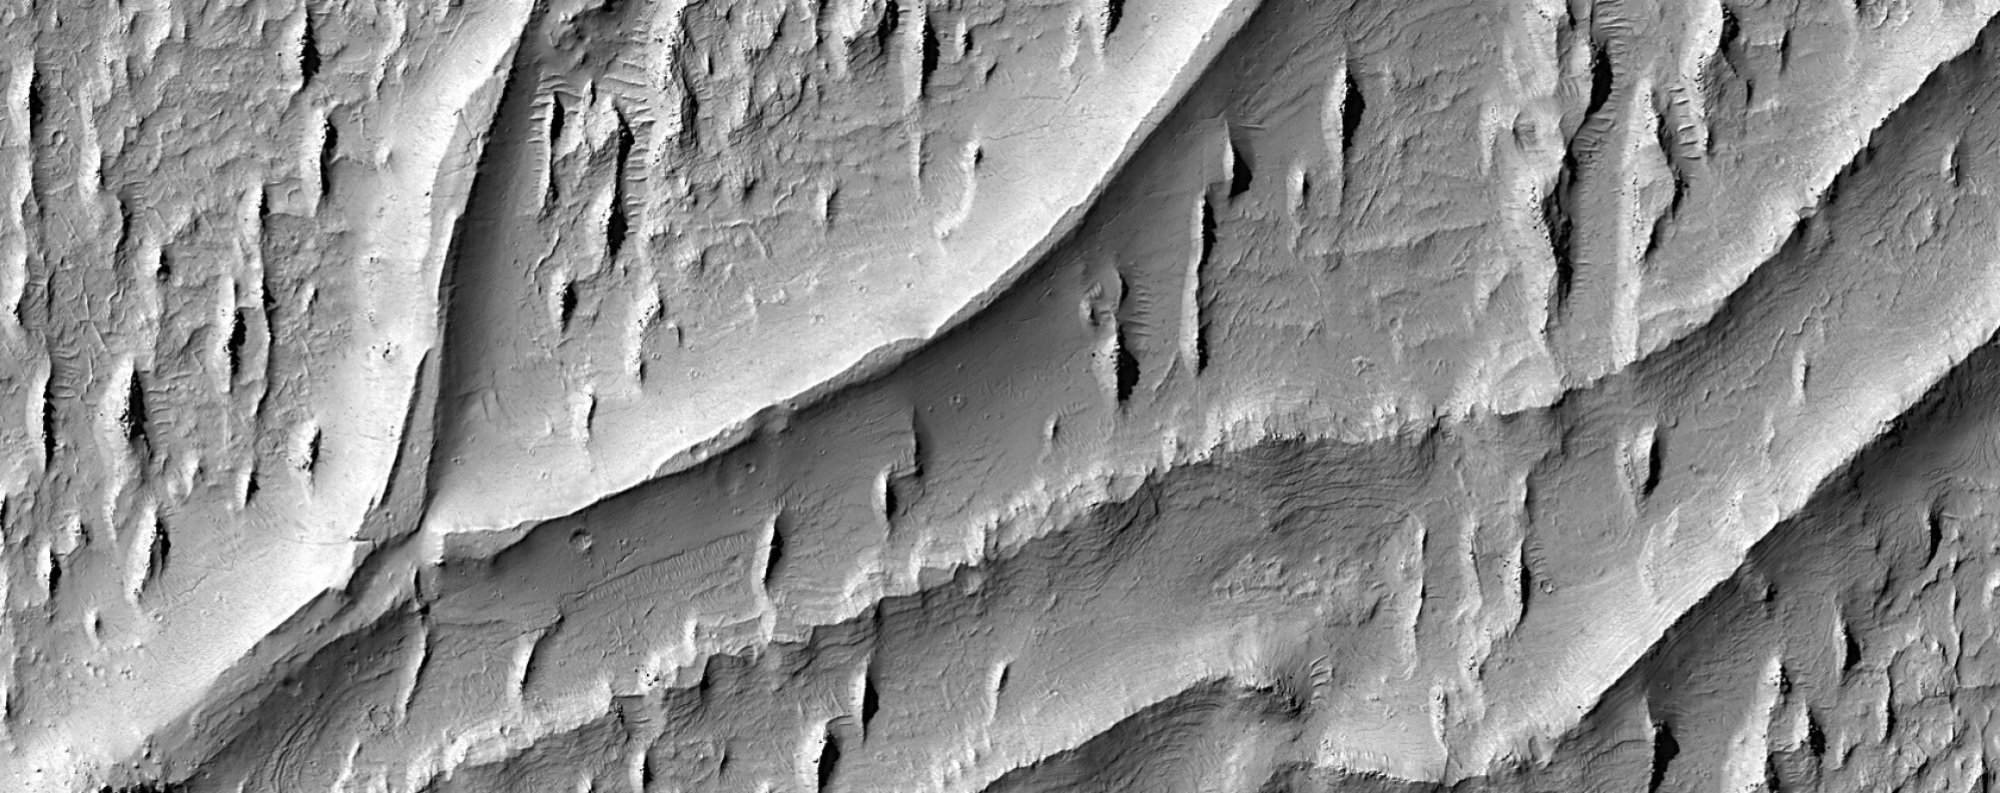 A zoomed-in view of the ridges left by past rivers on Mars.